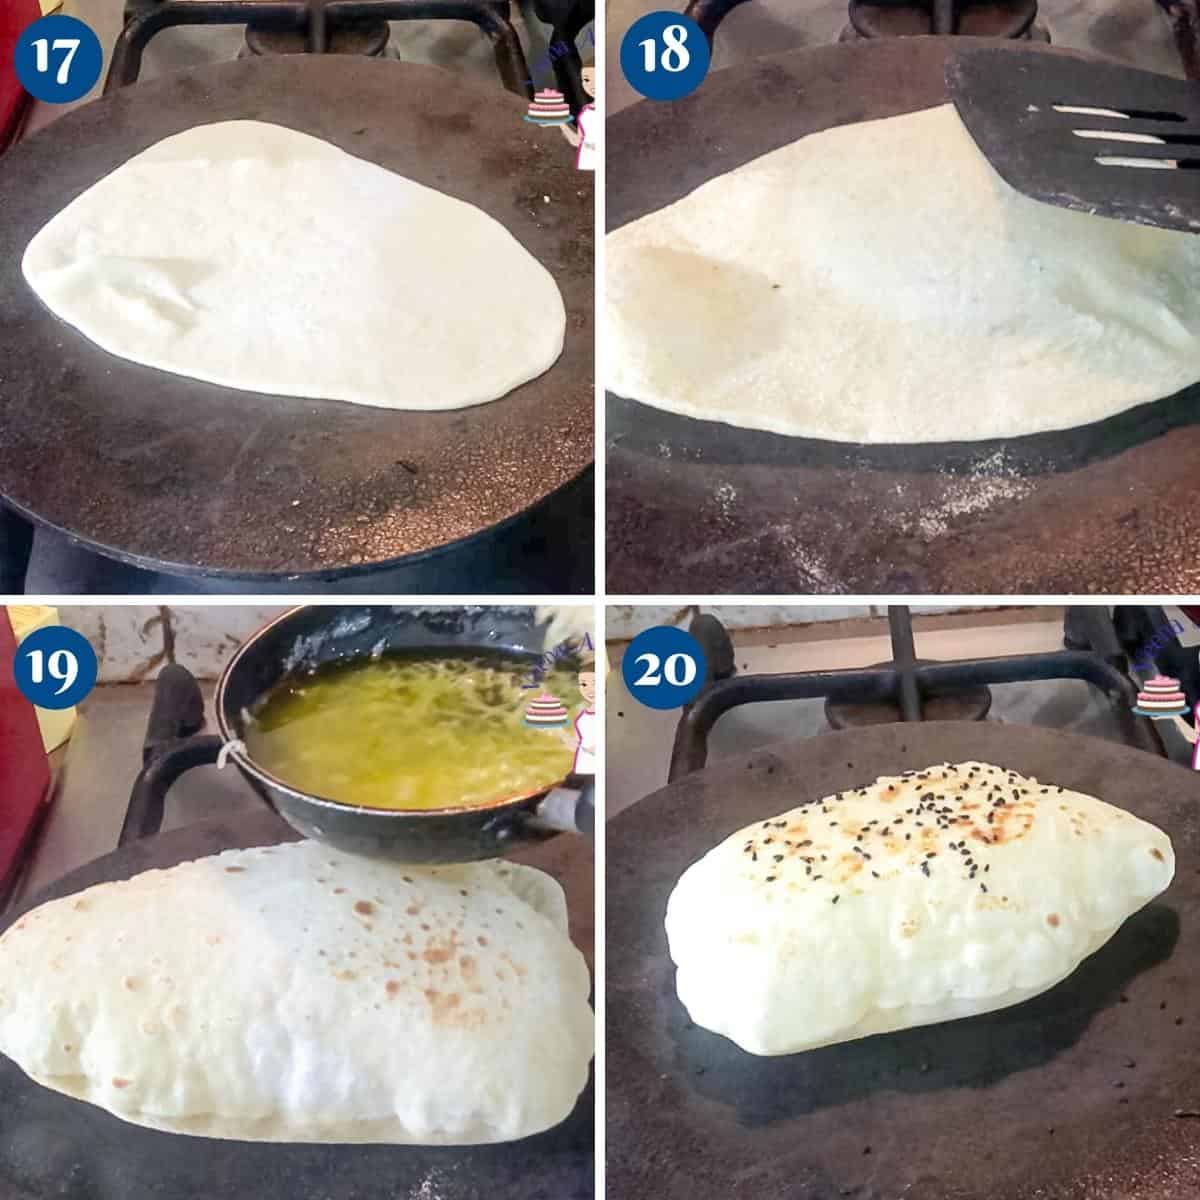 Progress pictures collage brushing the naan with garlic butter.